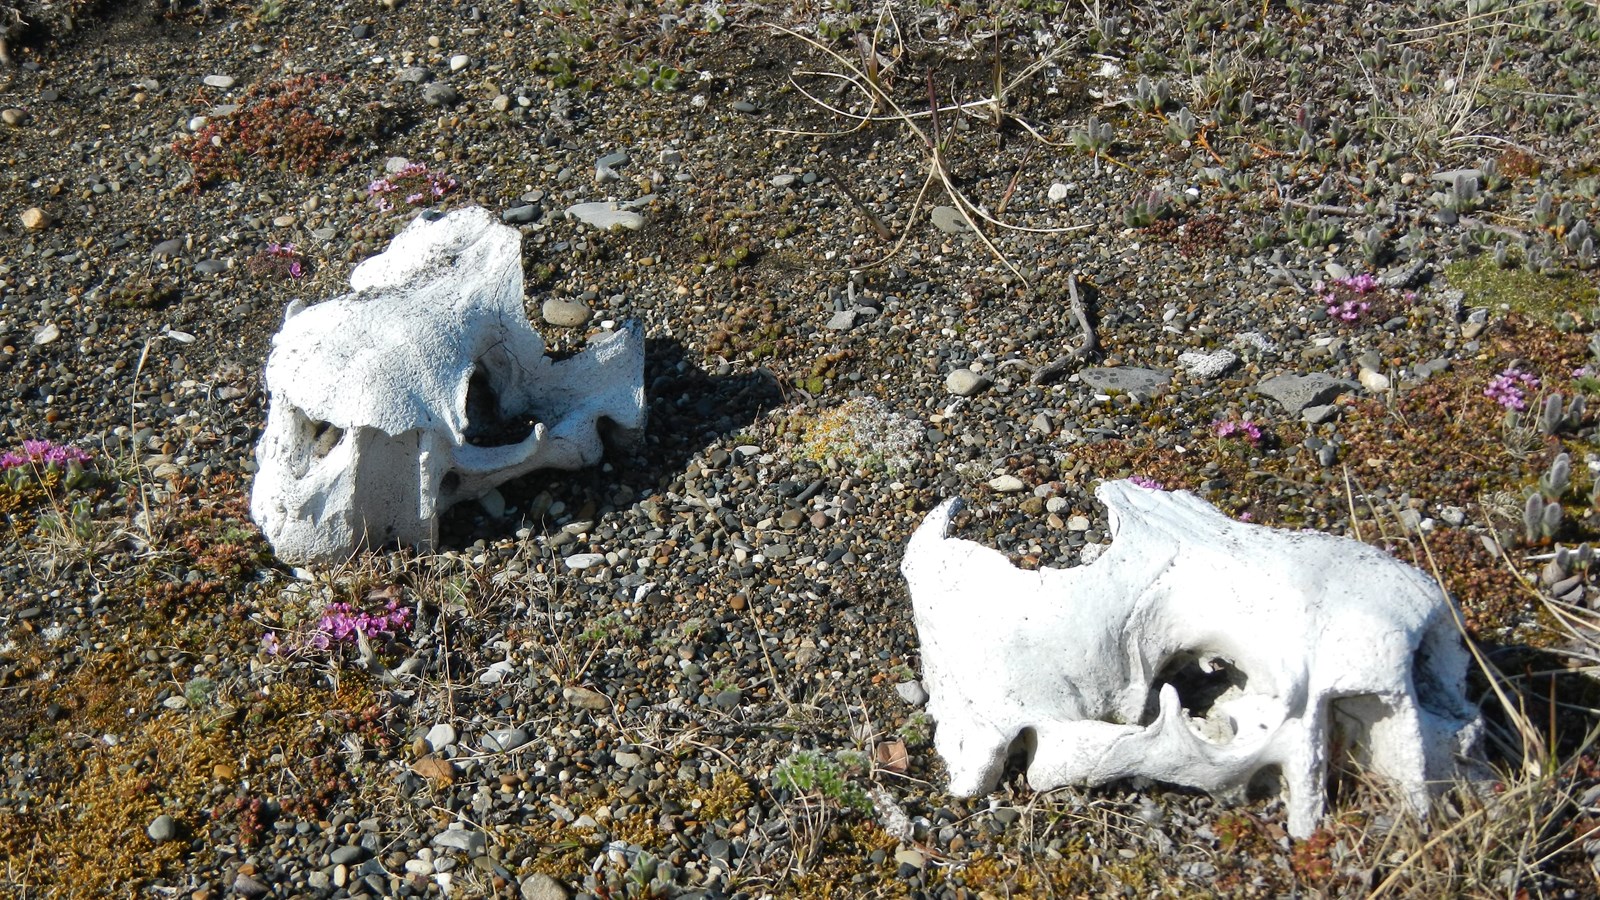 Two walrus skulls on the tundra surrounded by tiny purple wildflowers.